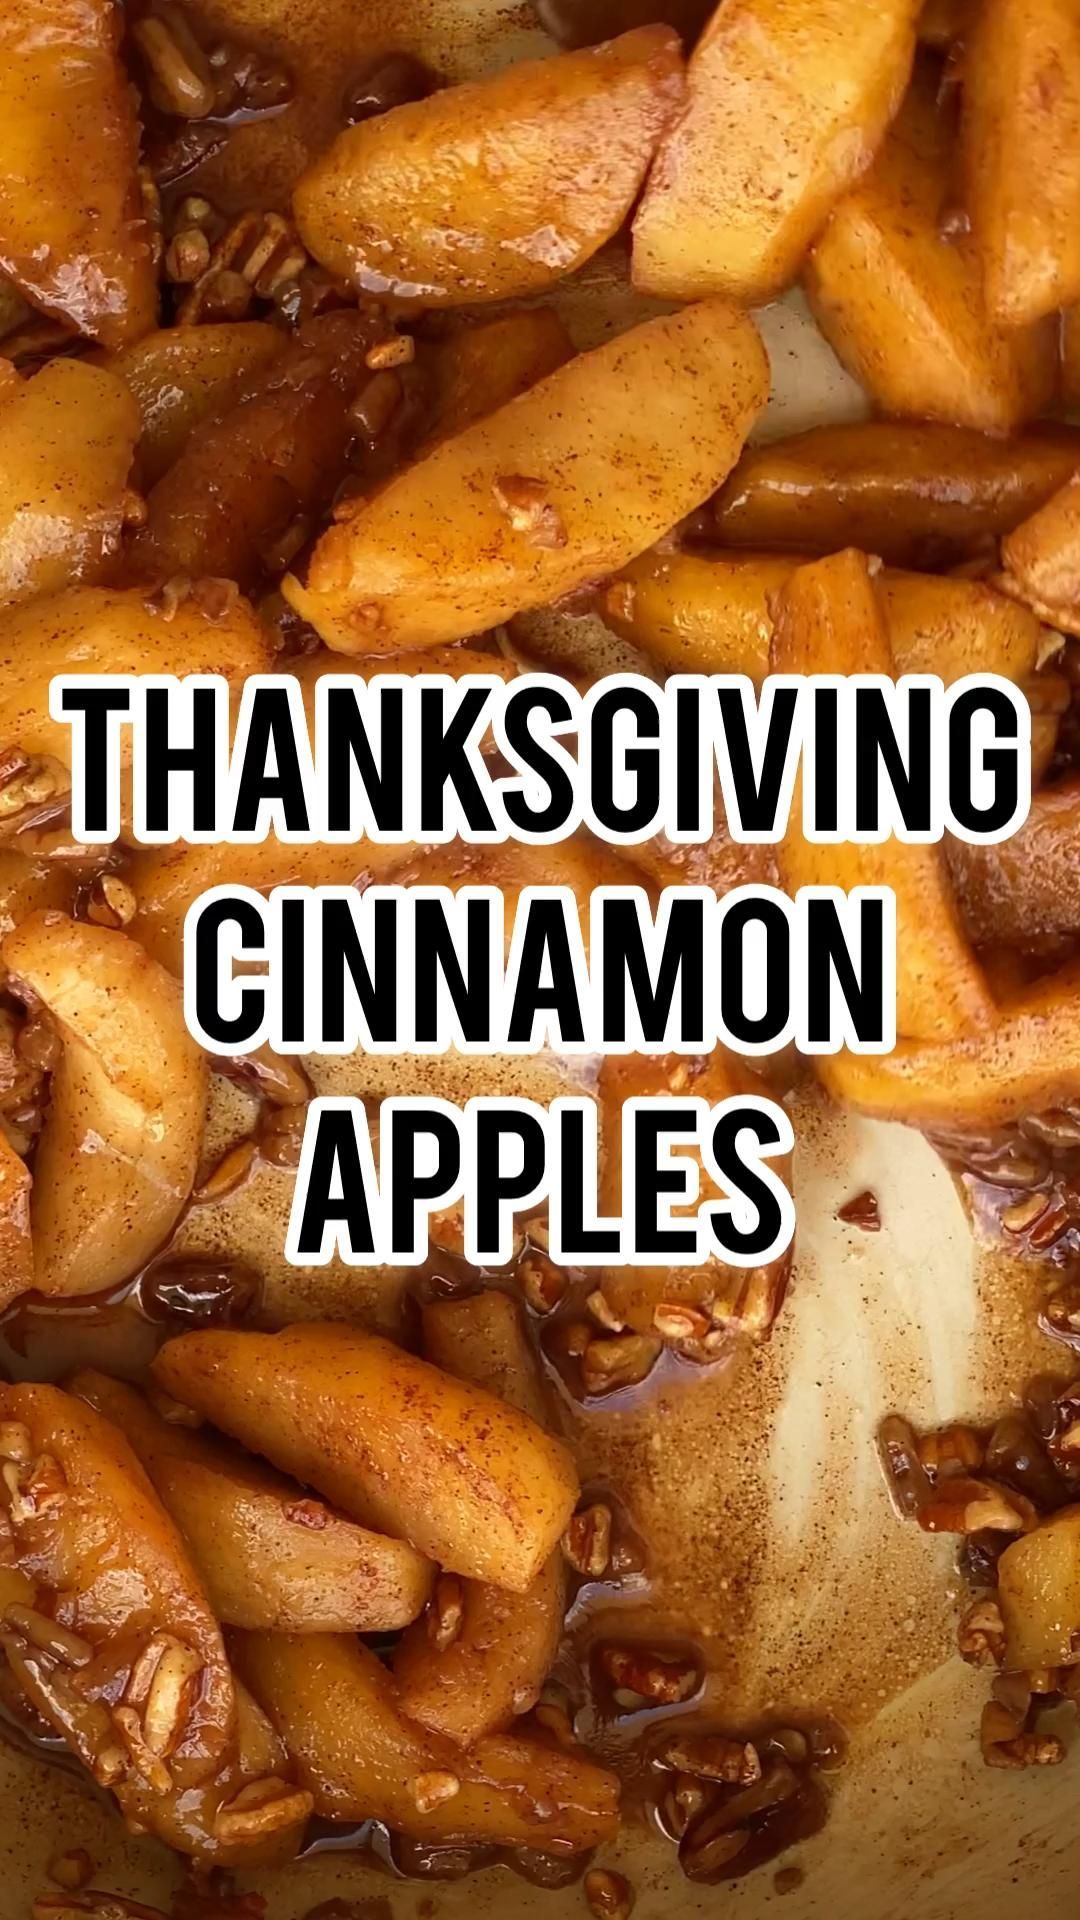 Thanksgiving Cinnamon Apples (SIDE DISH) - Thanksgiving Cinnamon Apples (SIDE DISH) -   thanksgiving recipes side dishes easy